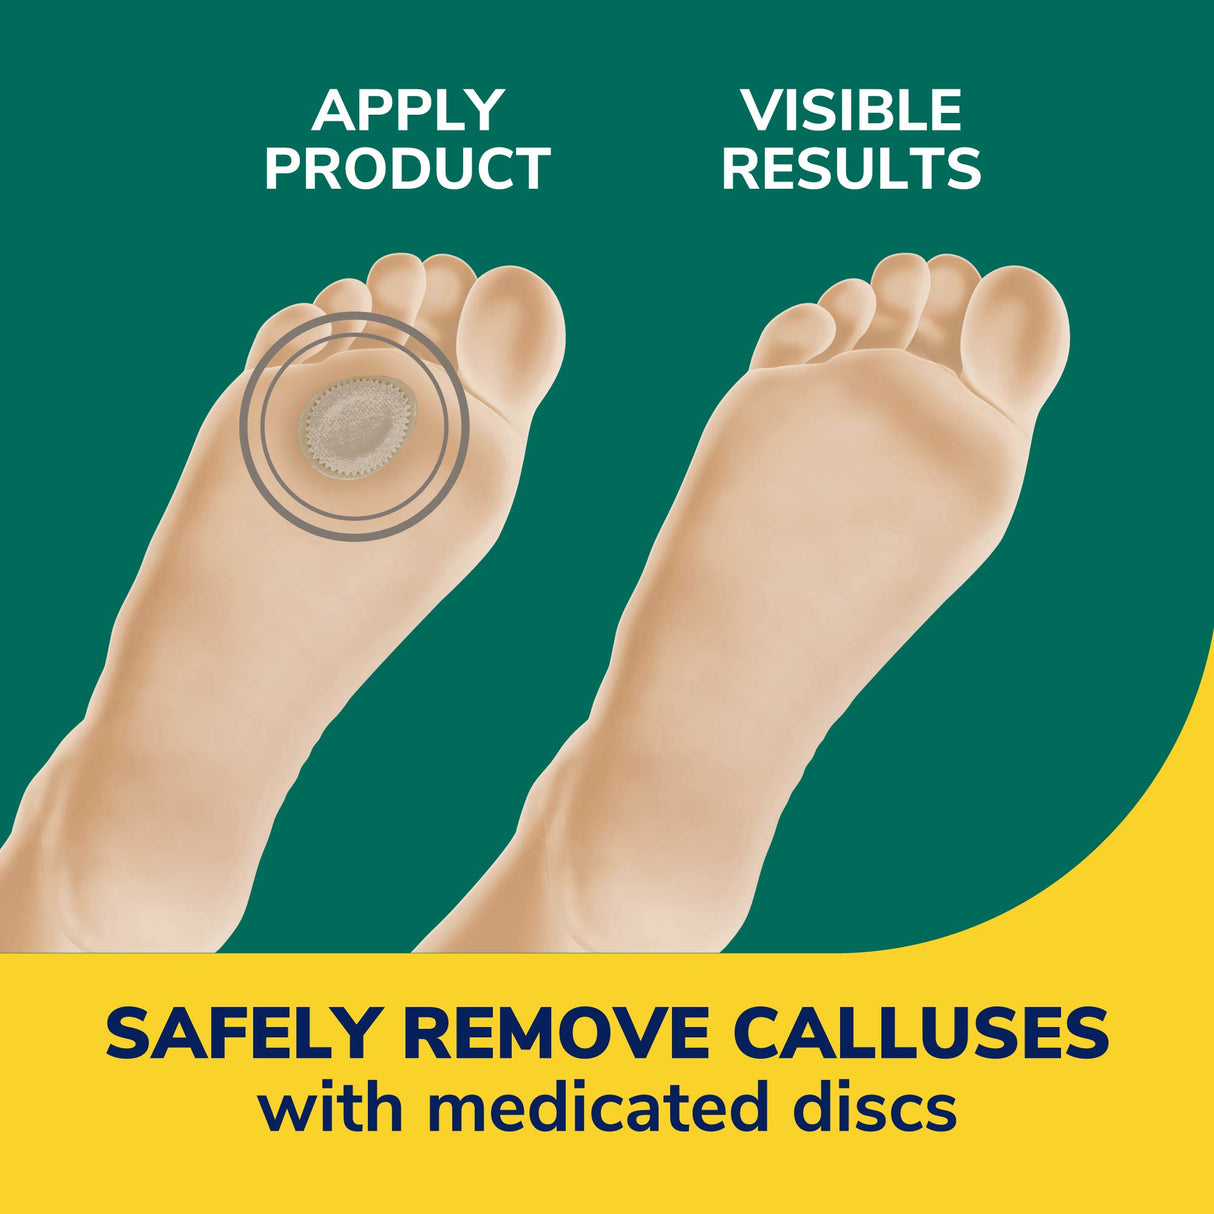 image of safely remove calluses with medicated discs